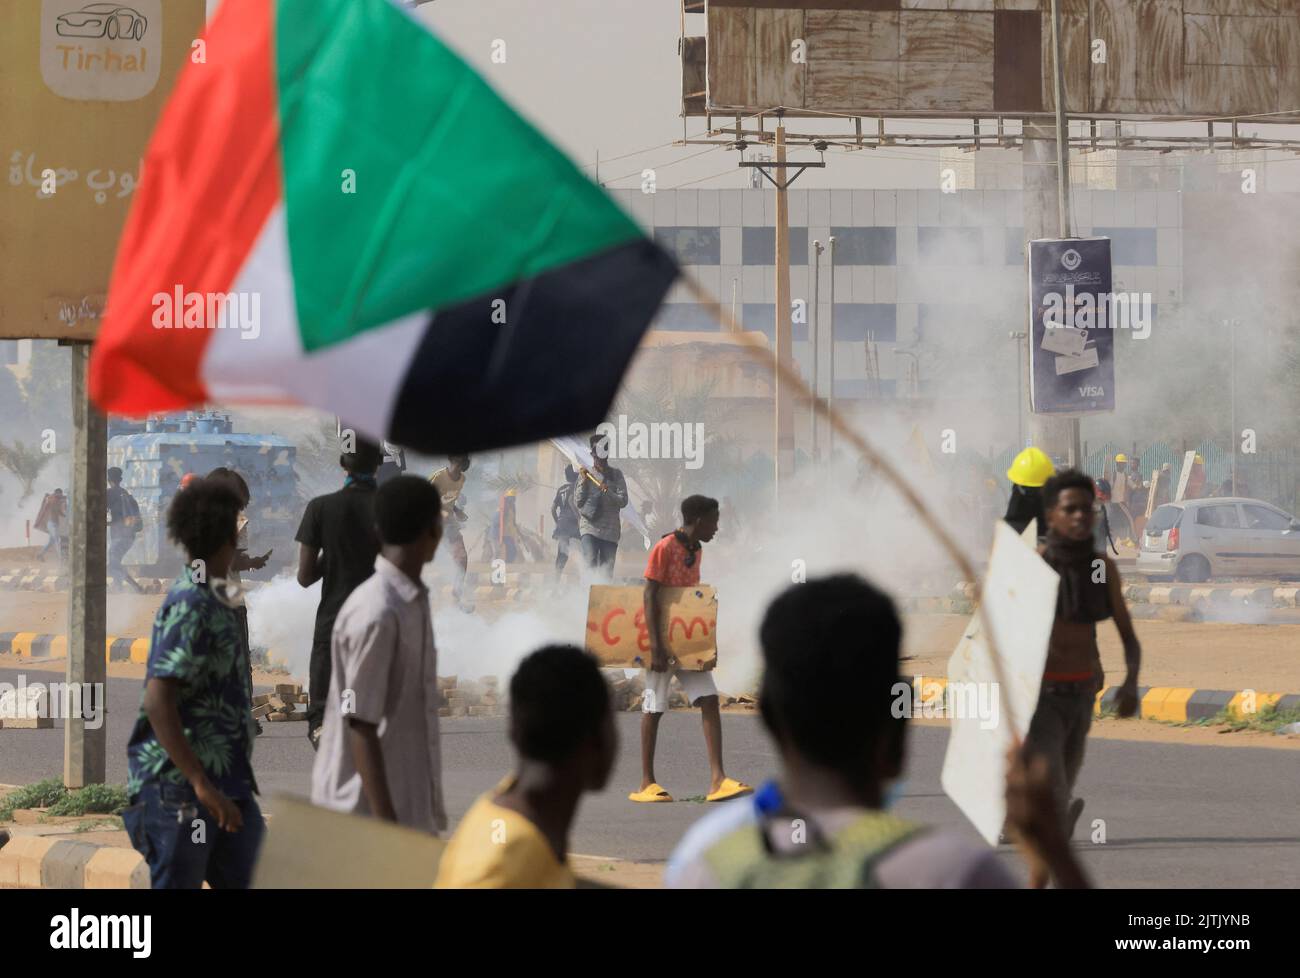 Protesters march during a rally against military rule following the last coup, in Khartoum, Sudan August 31, 2022. REUTERS/Mohamed Nureldin Abdallah Stock Photo